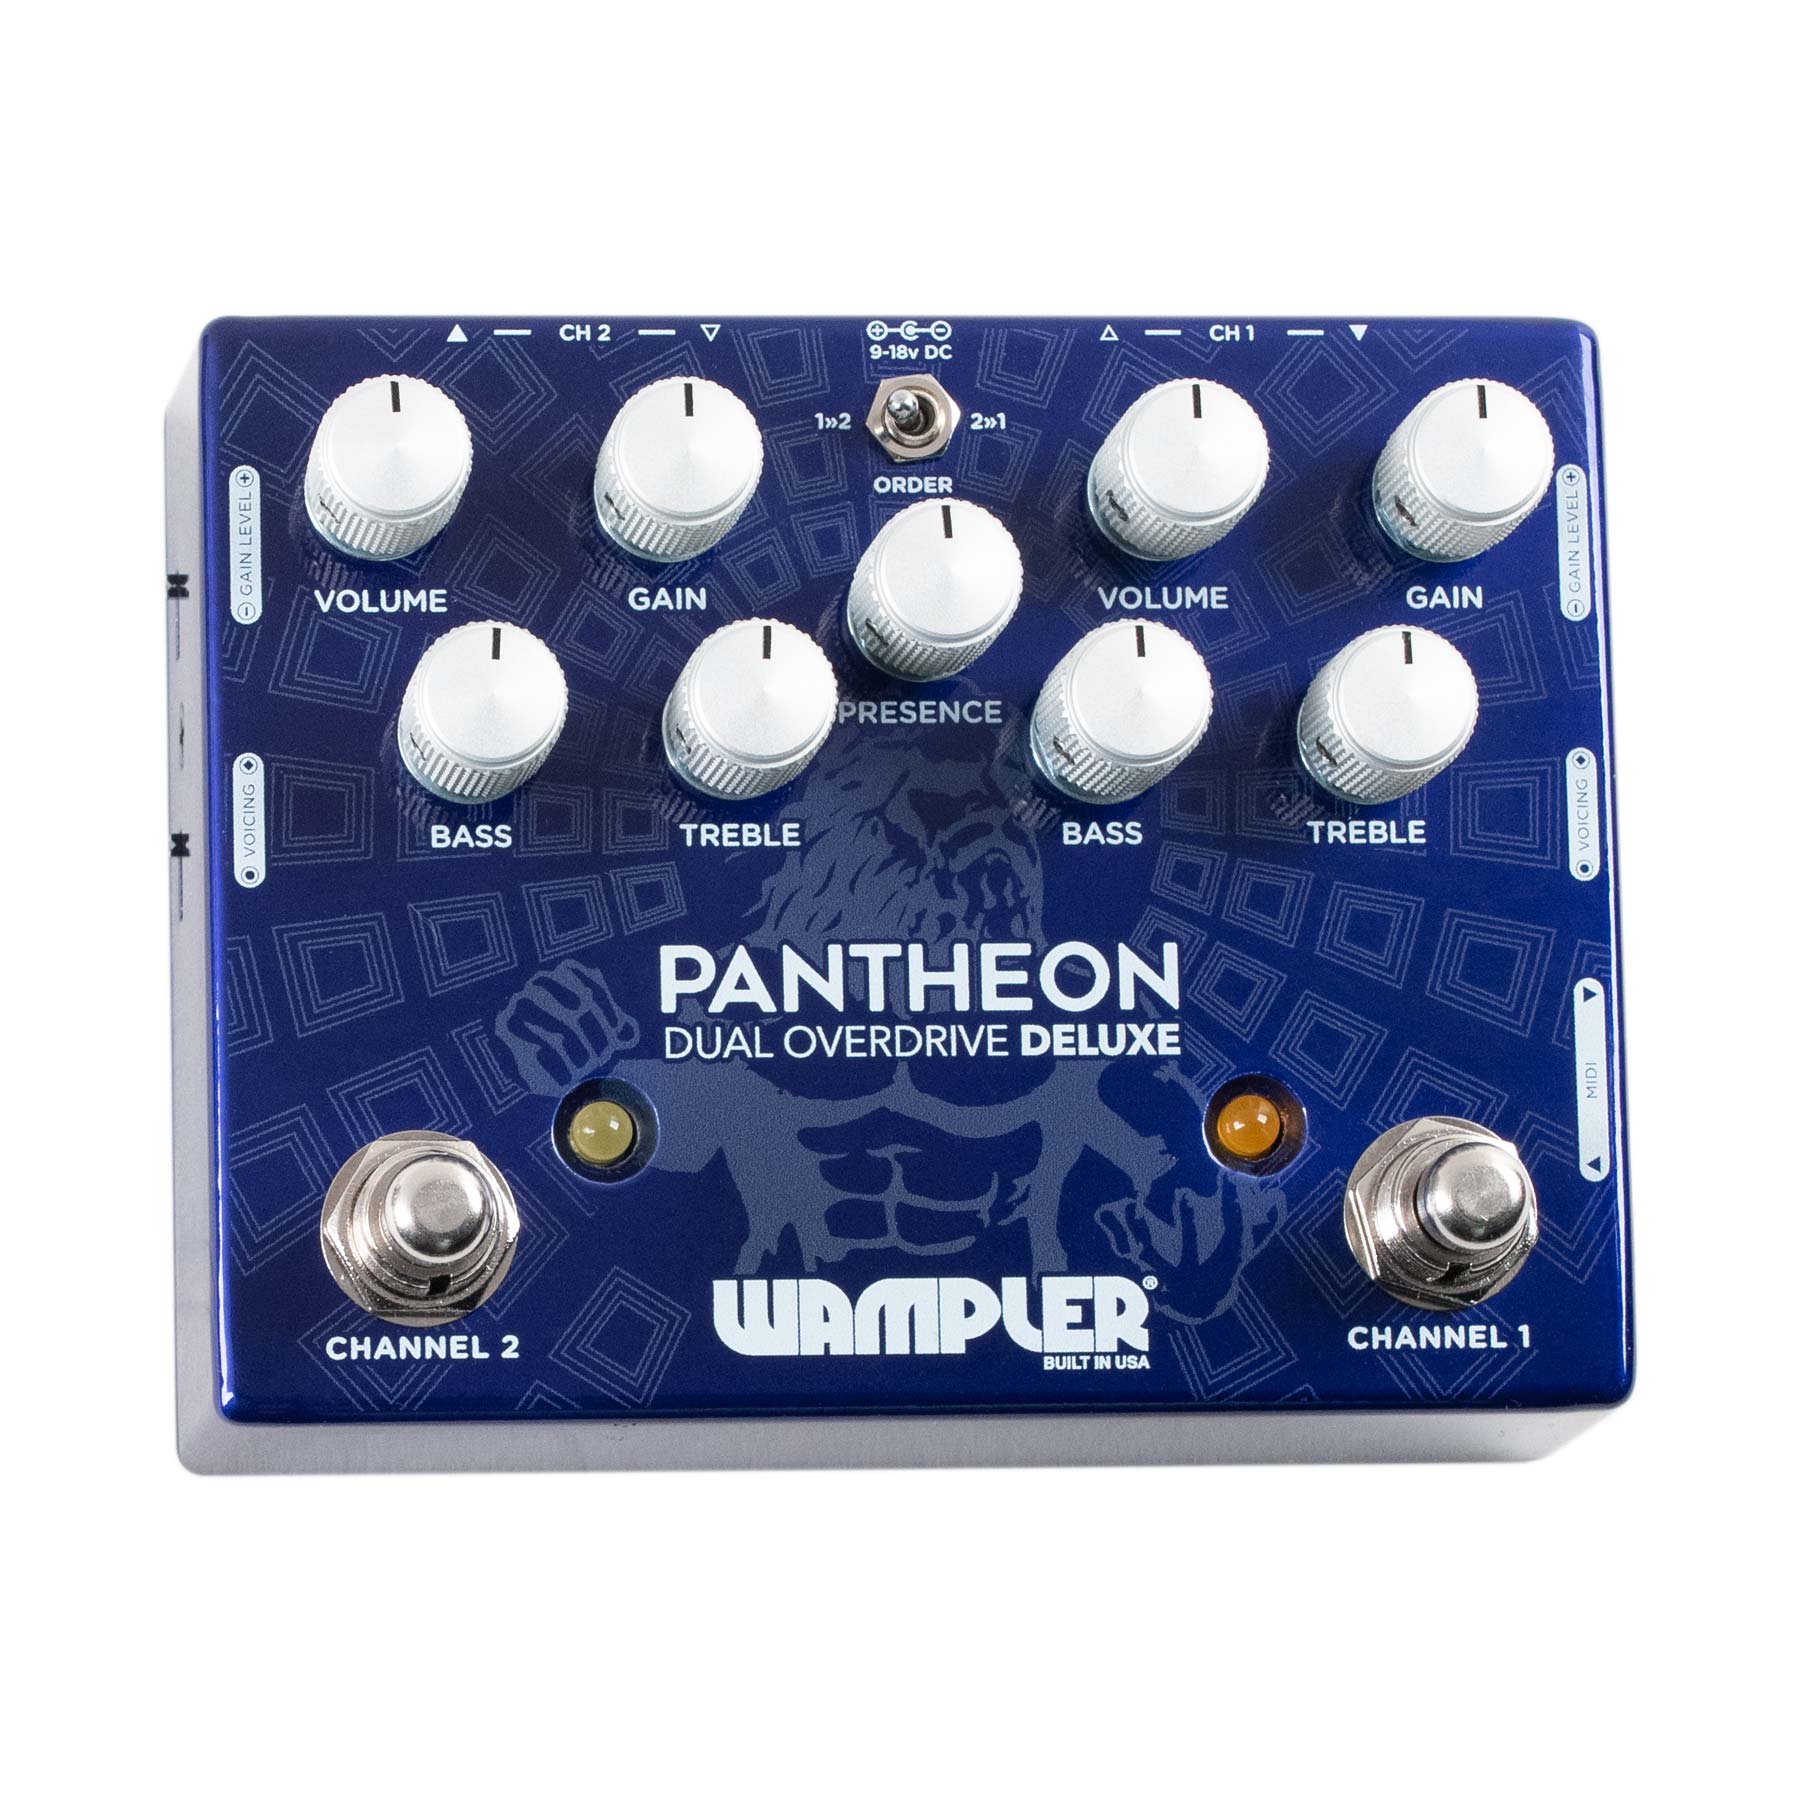 WAMPLER PANTHEON DELUXE DUAL OVERDRIVE PEDAL